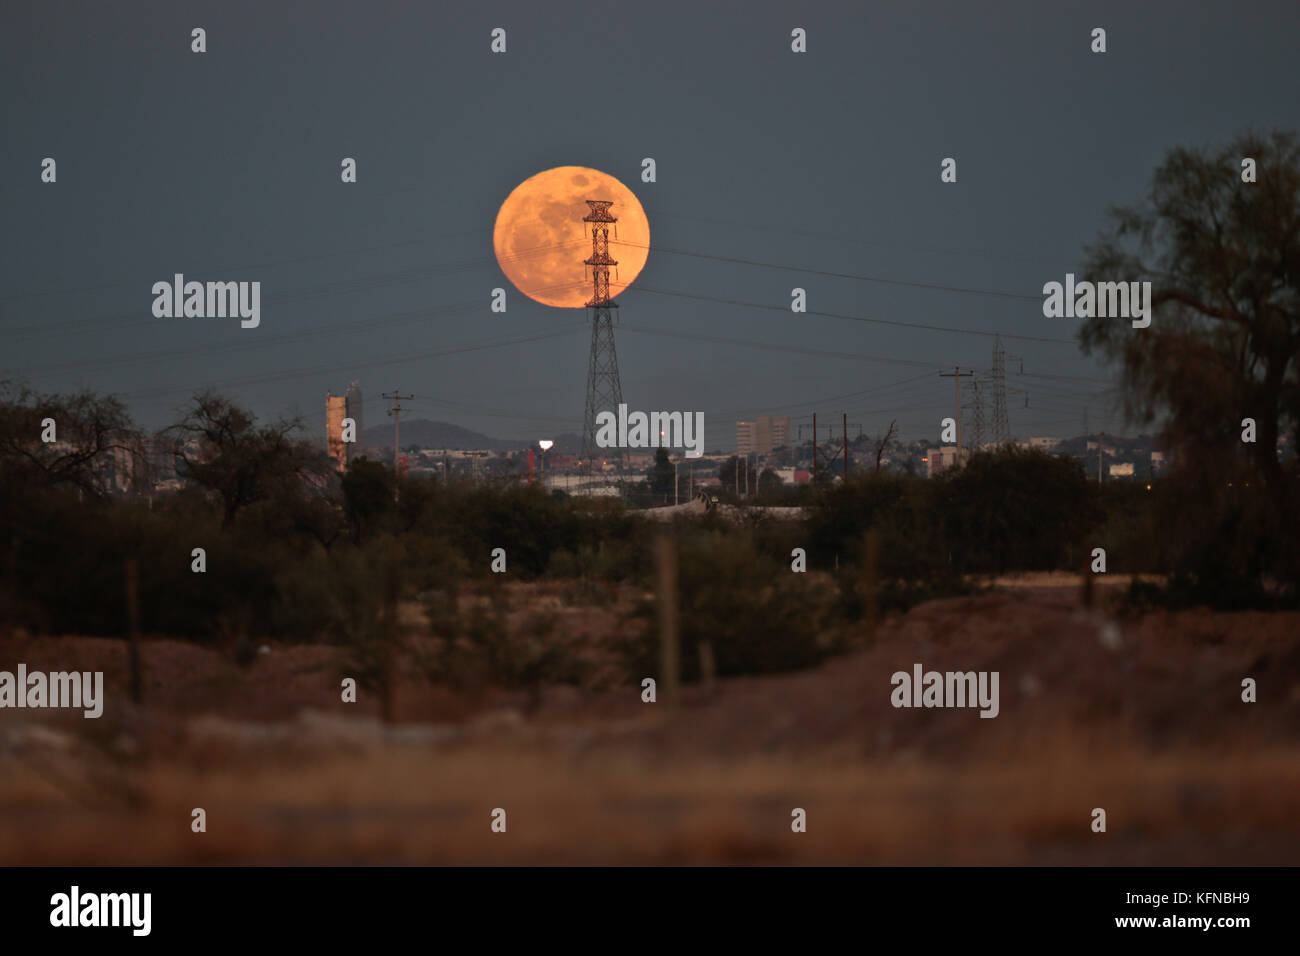 One of the first 2013 full moons could be seen today before anocecer on the sky to the east of the city of Hermosillo, Sonora. The Moon is the only natural satellite of Earth. With an equatorial diameter km1 3474 is the solar system's largest satellite fifth, while as compared to the proportional size of its planet is the largest satellite: one quarter the diameter of Earth and 1/81 its mass. Una de las primeras lunas llenas del año 2013 se pudo apreciar hoy  antes del anocecer sobre el cielo al  oriente de la ciudad de Hermosillo, Sonora. La Luna es el único satélite natural de la Tierra. Con Stock Photo